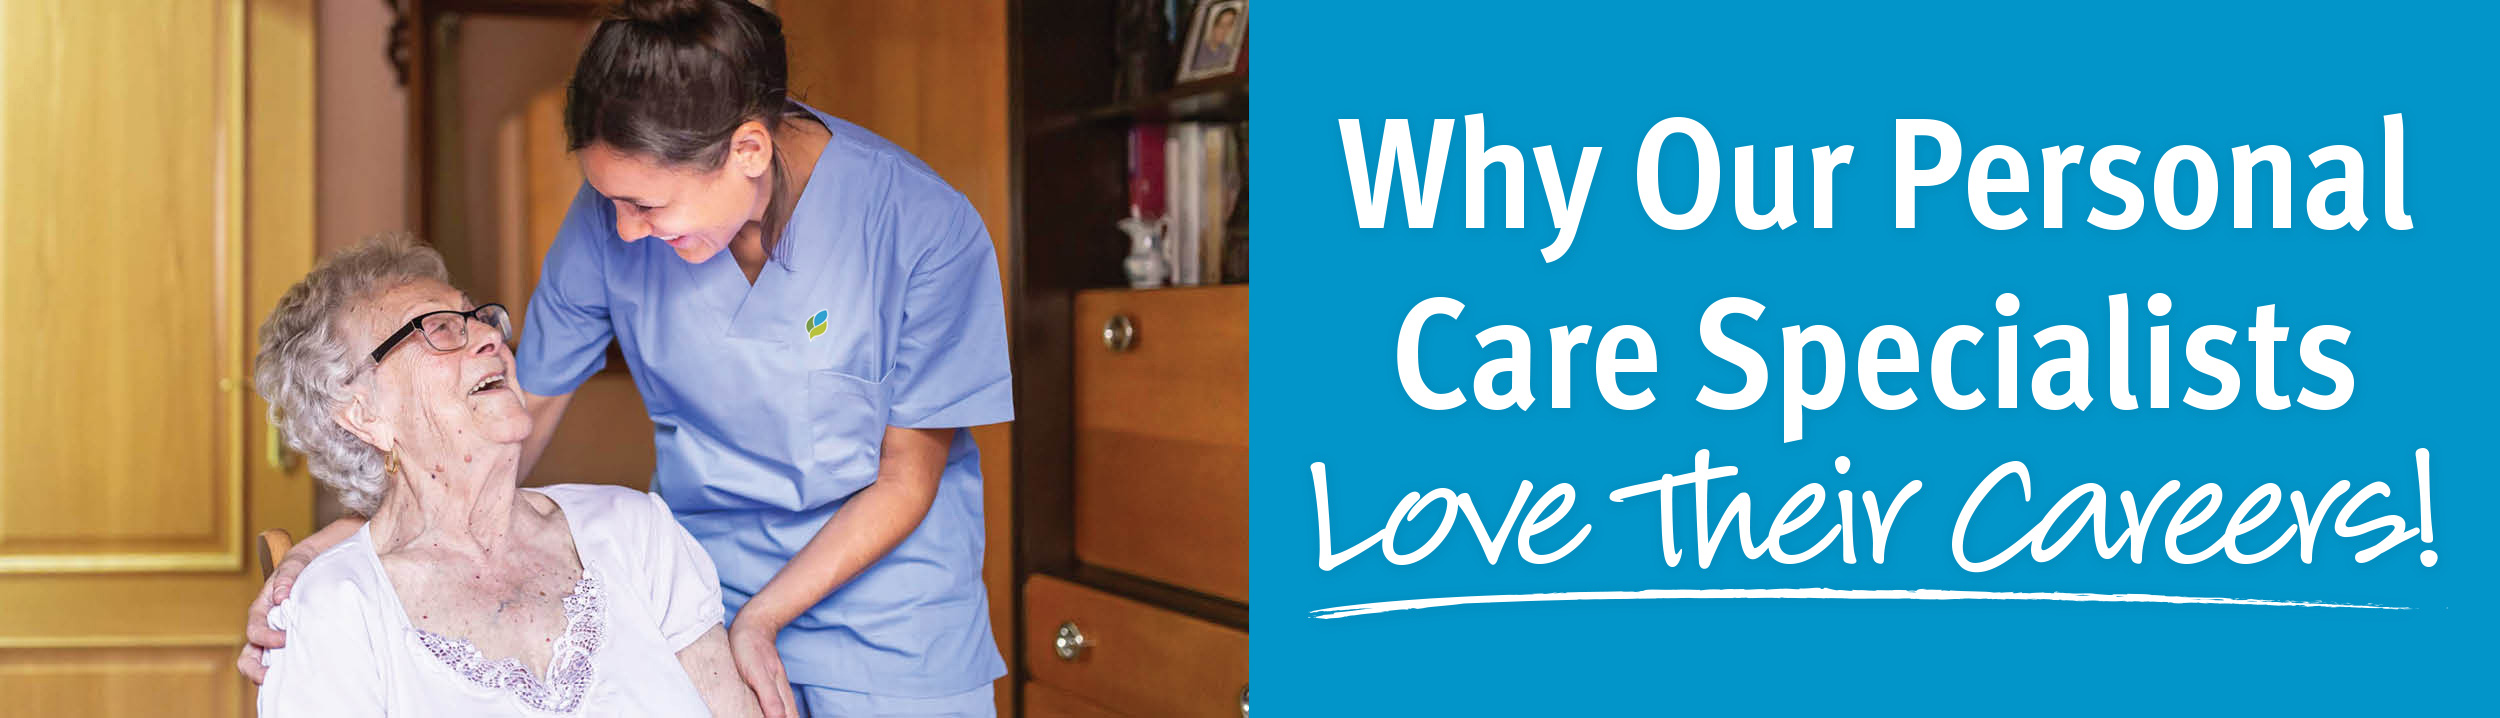 Why Our Personal Care Specialists Love Their Careers!